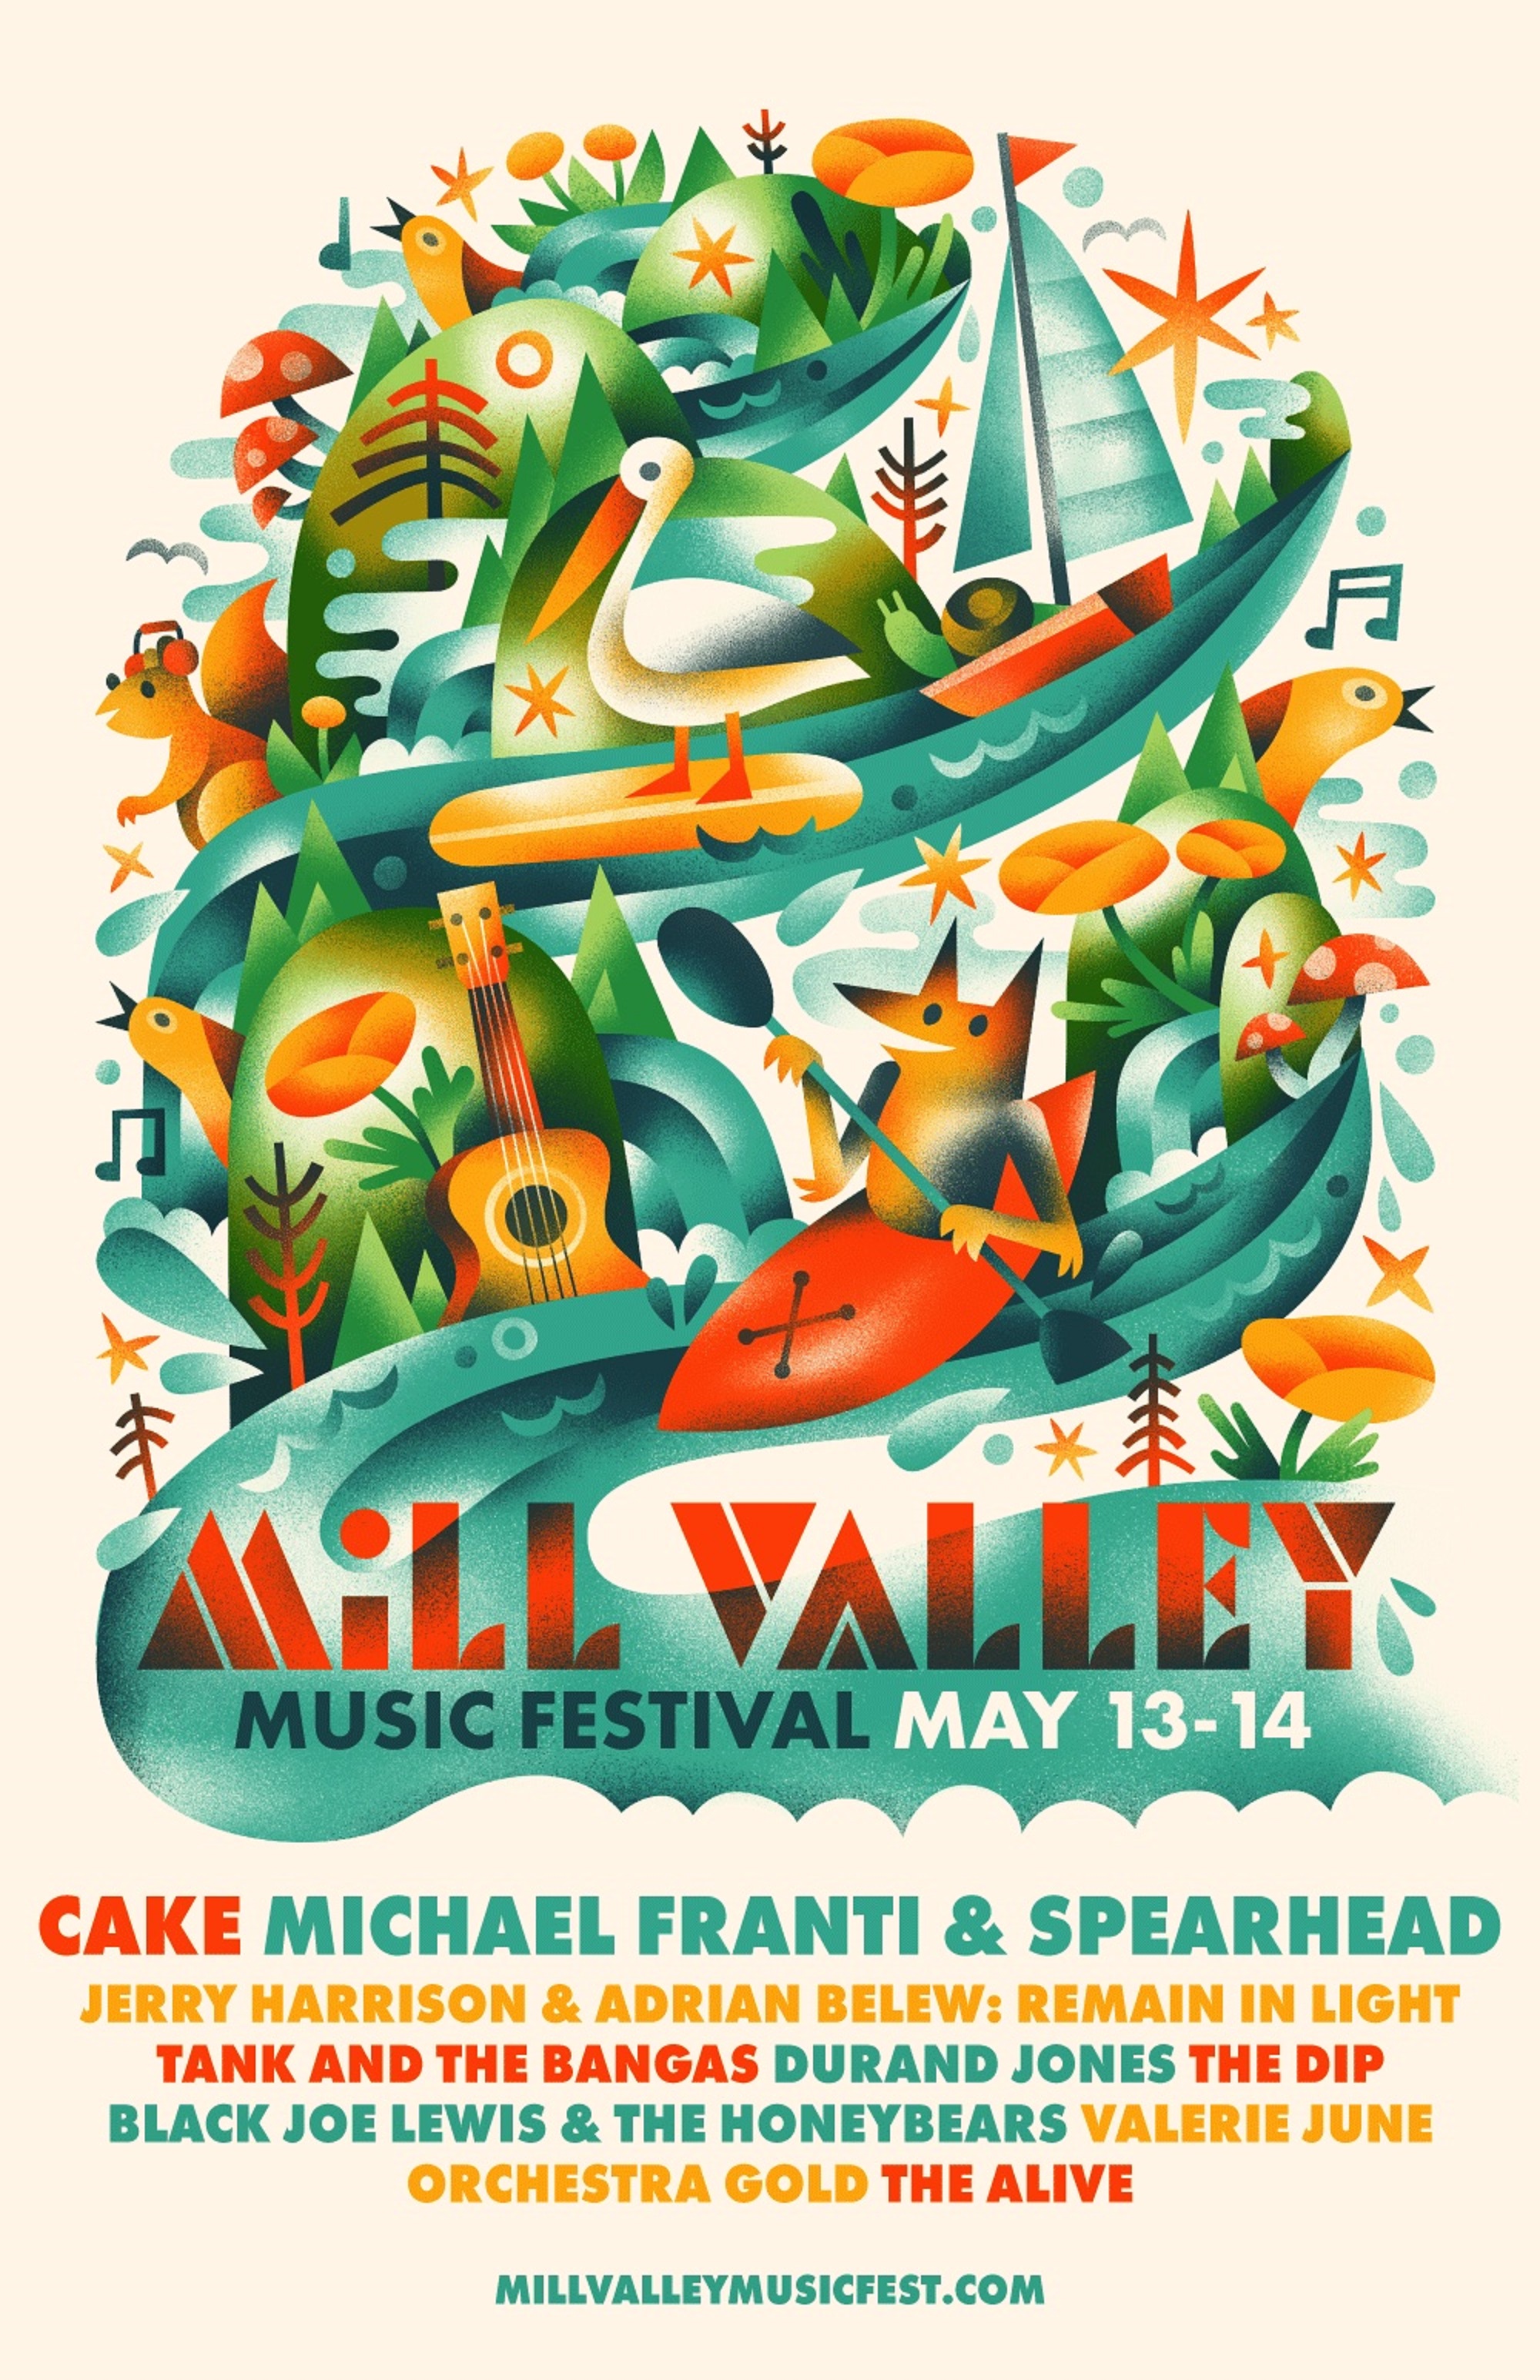 MILL VALLEY MUSIC FESTIVAL ANNOUNCES 2023 LINEUP WITH RETURN TO BAY AREA ON MAY 13-14